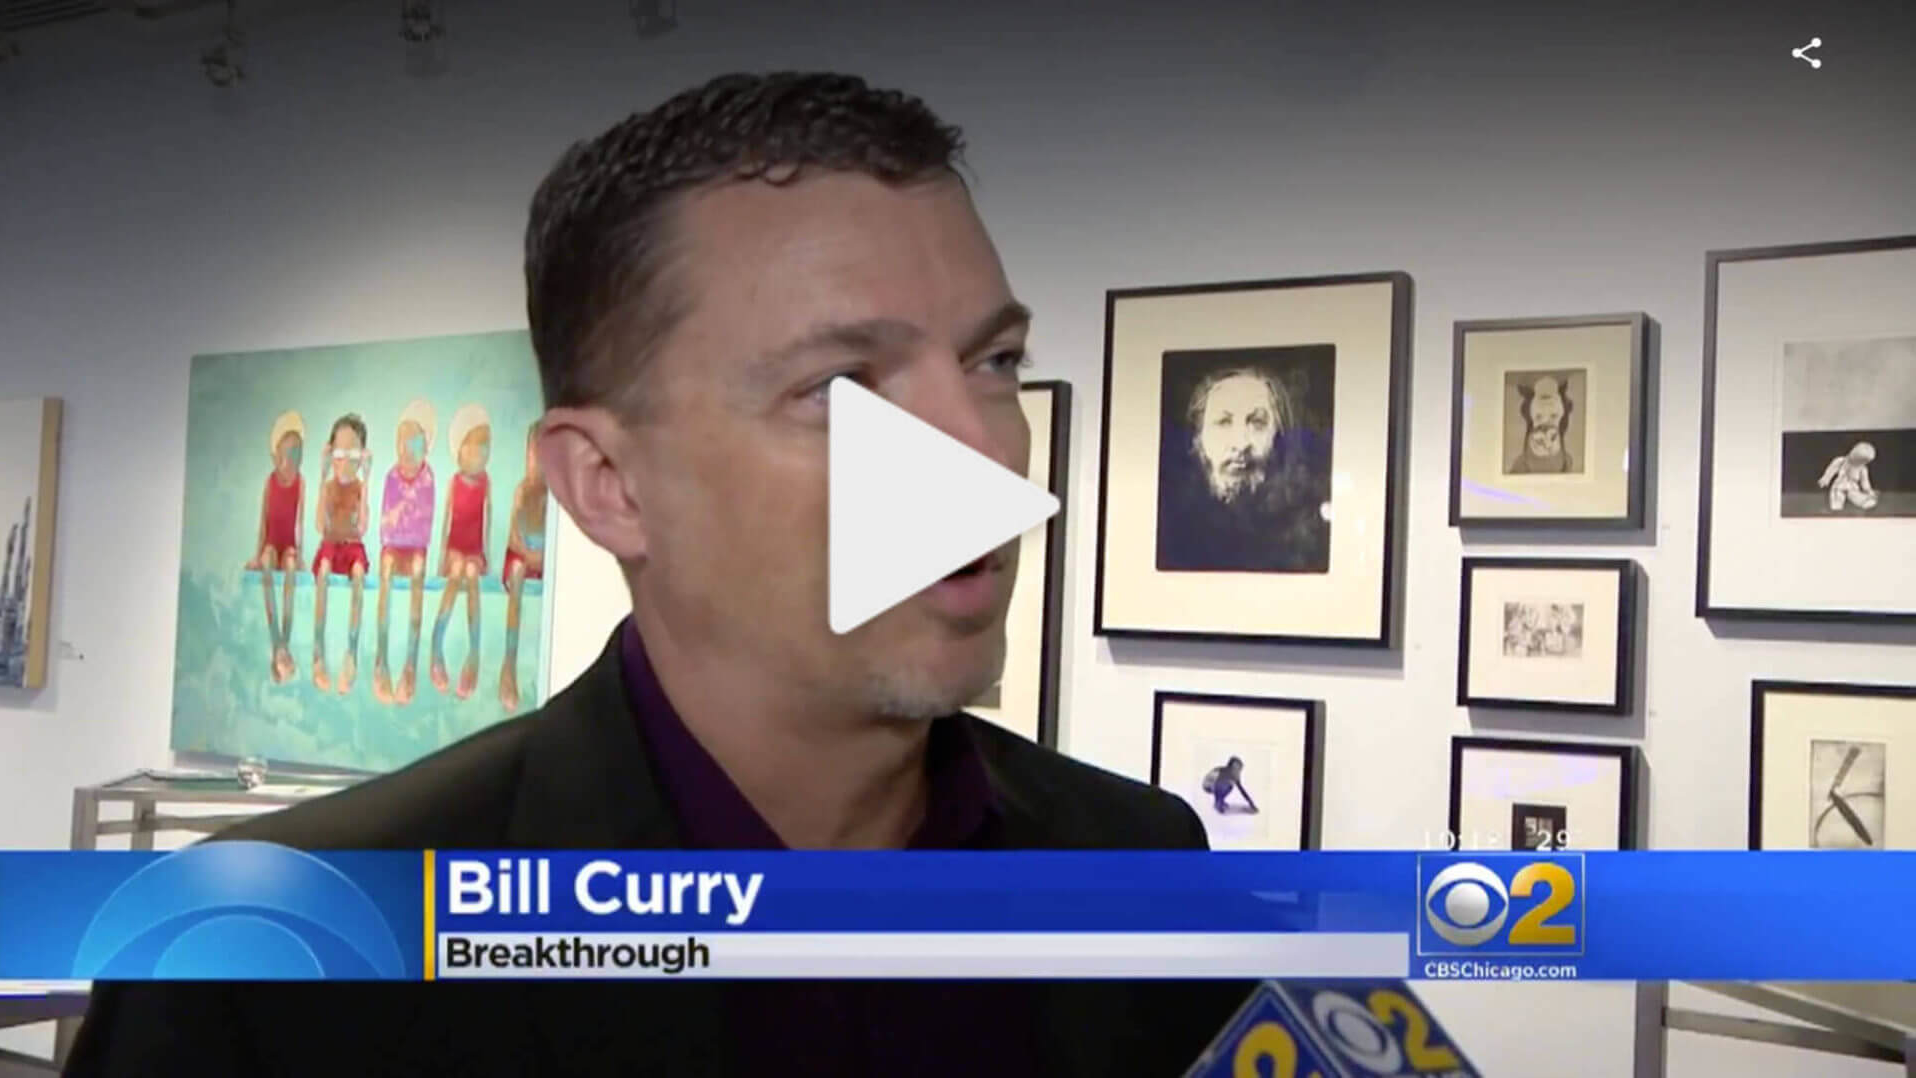 BIll Curry on CBS Chicago interview